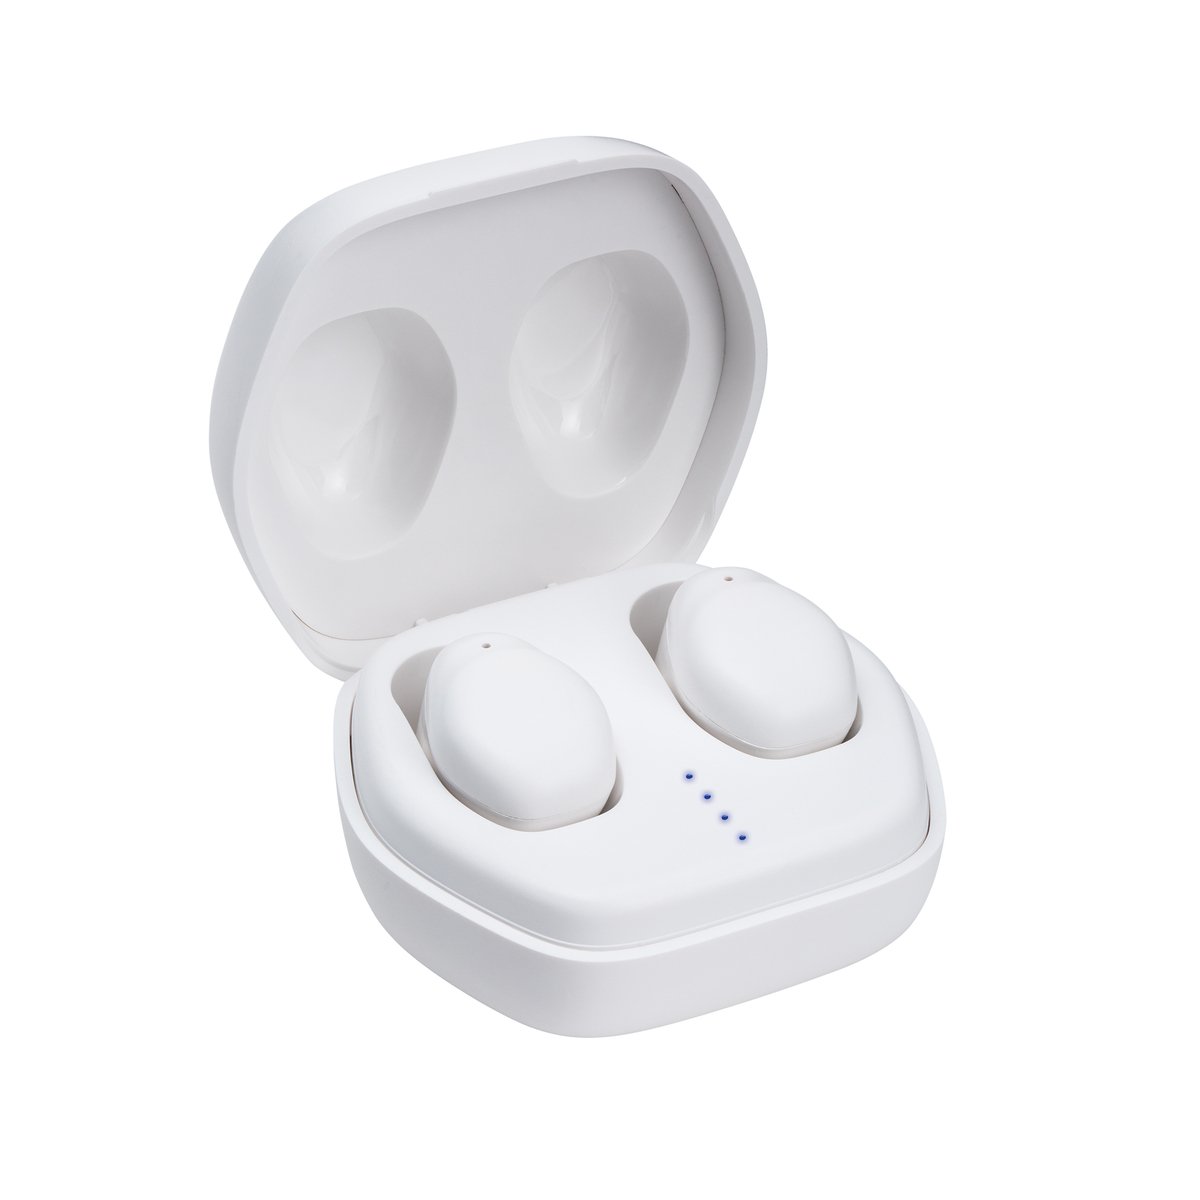 Wireless Earphone with charging case REEVES-ARDKIRK white